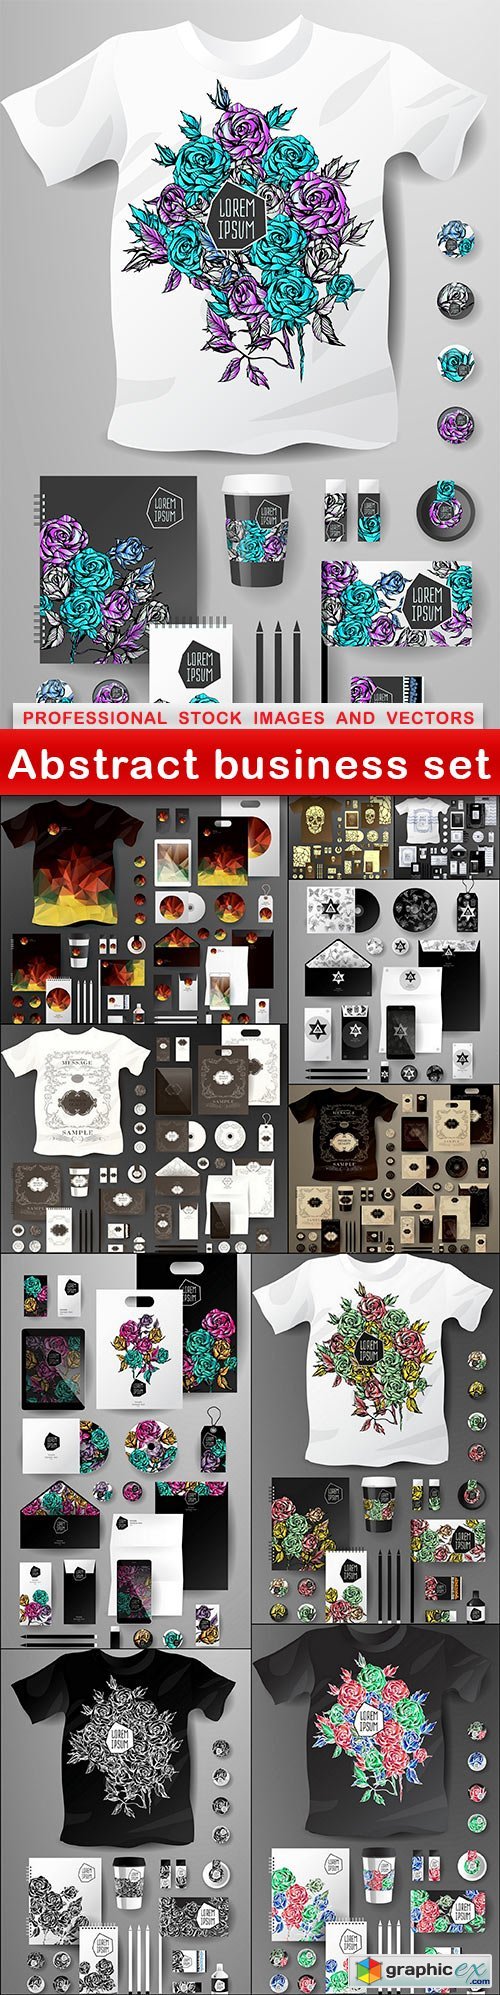 Abstract business set - 11 EPS